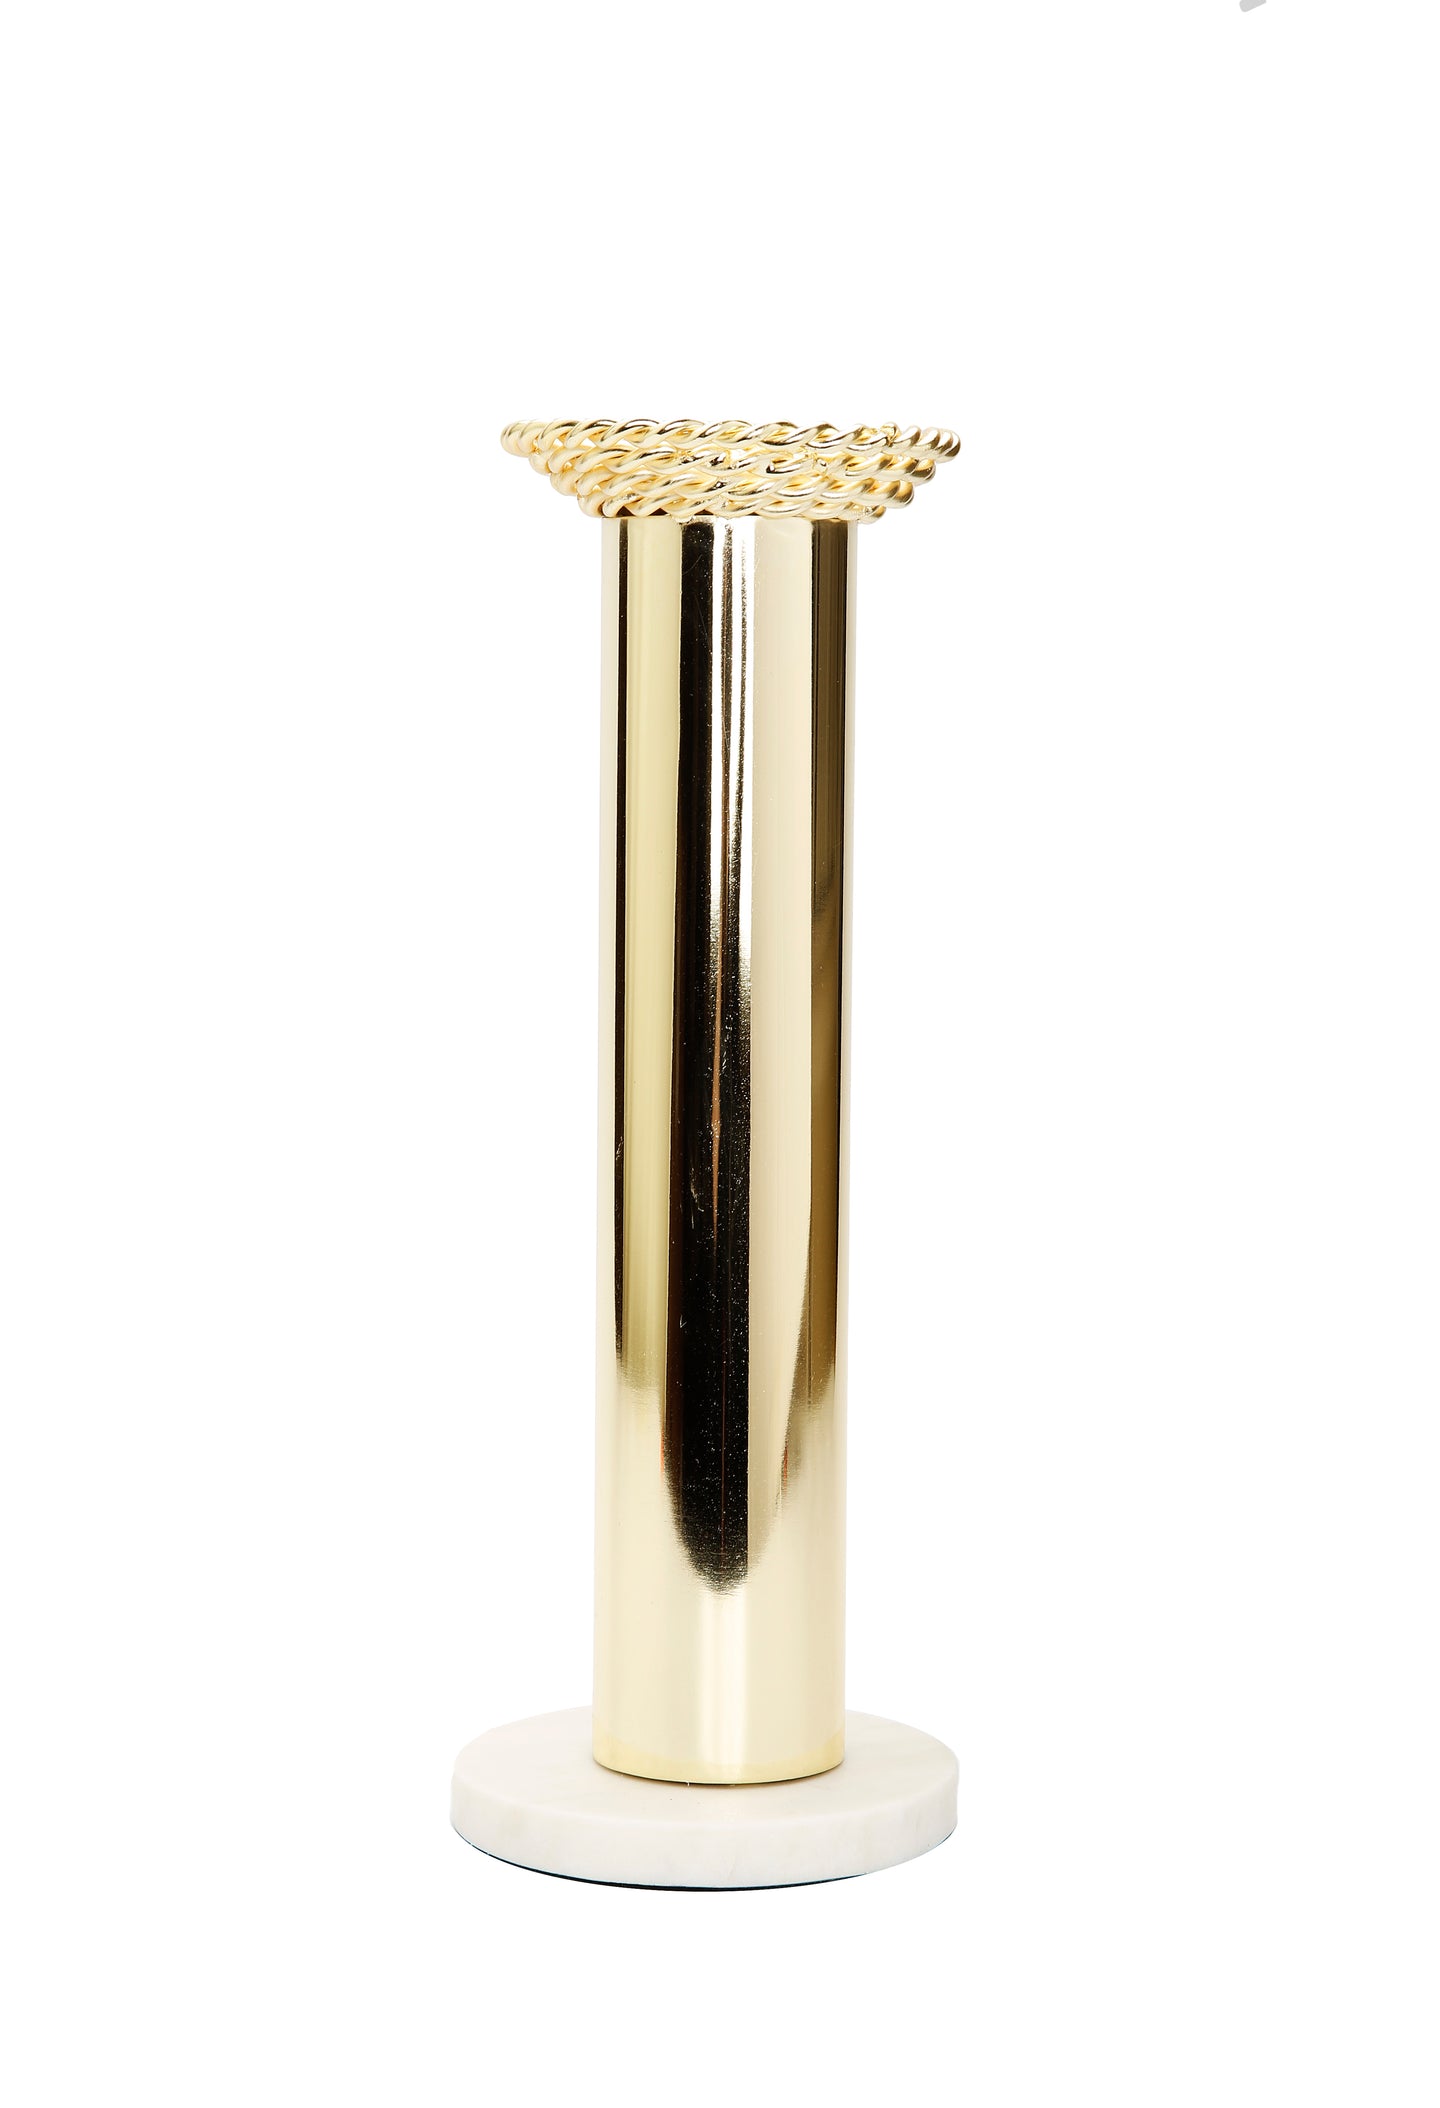 Gold Taper Candle Holder on Marble Base - 12.5